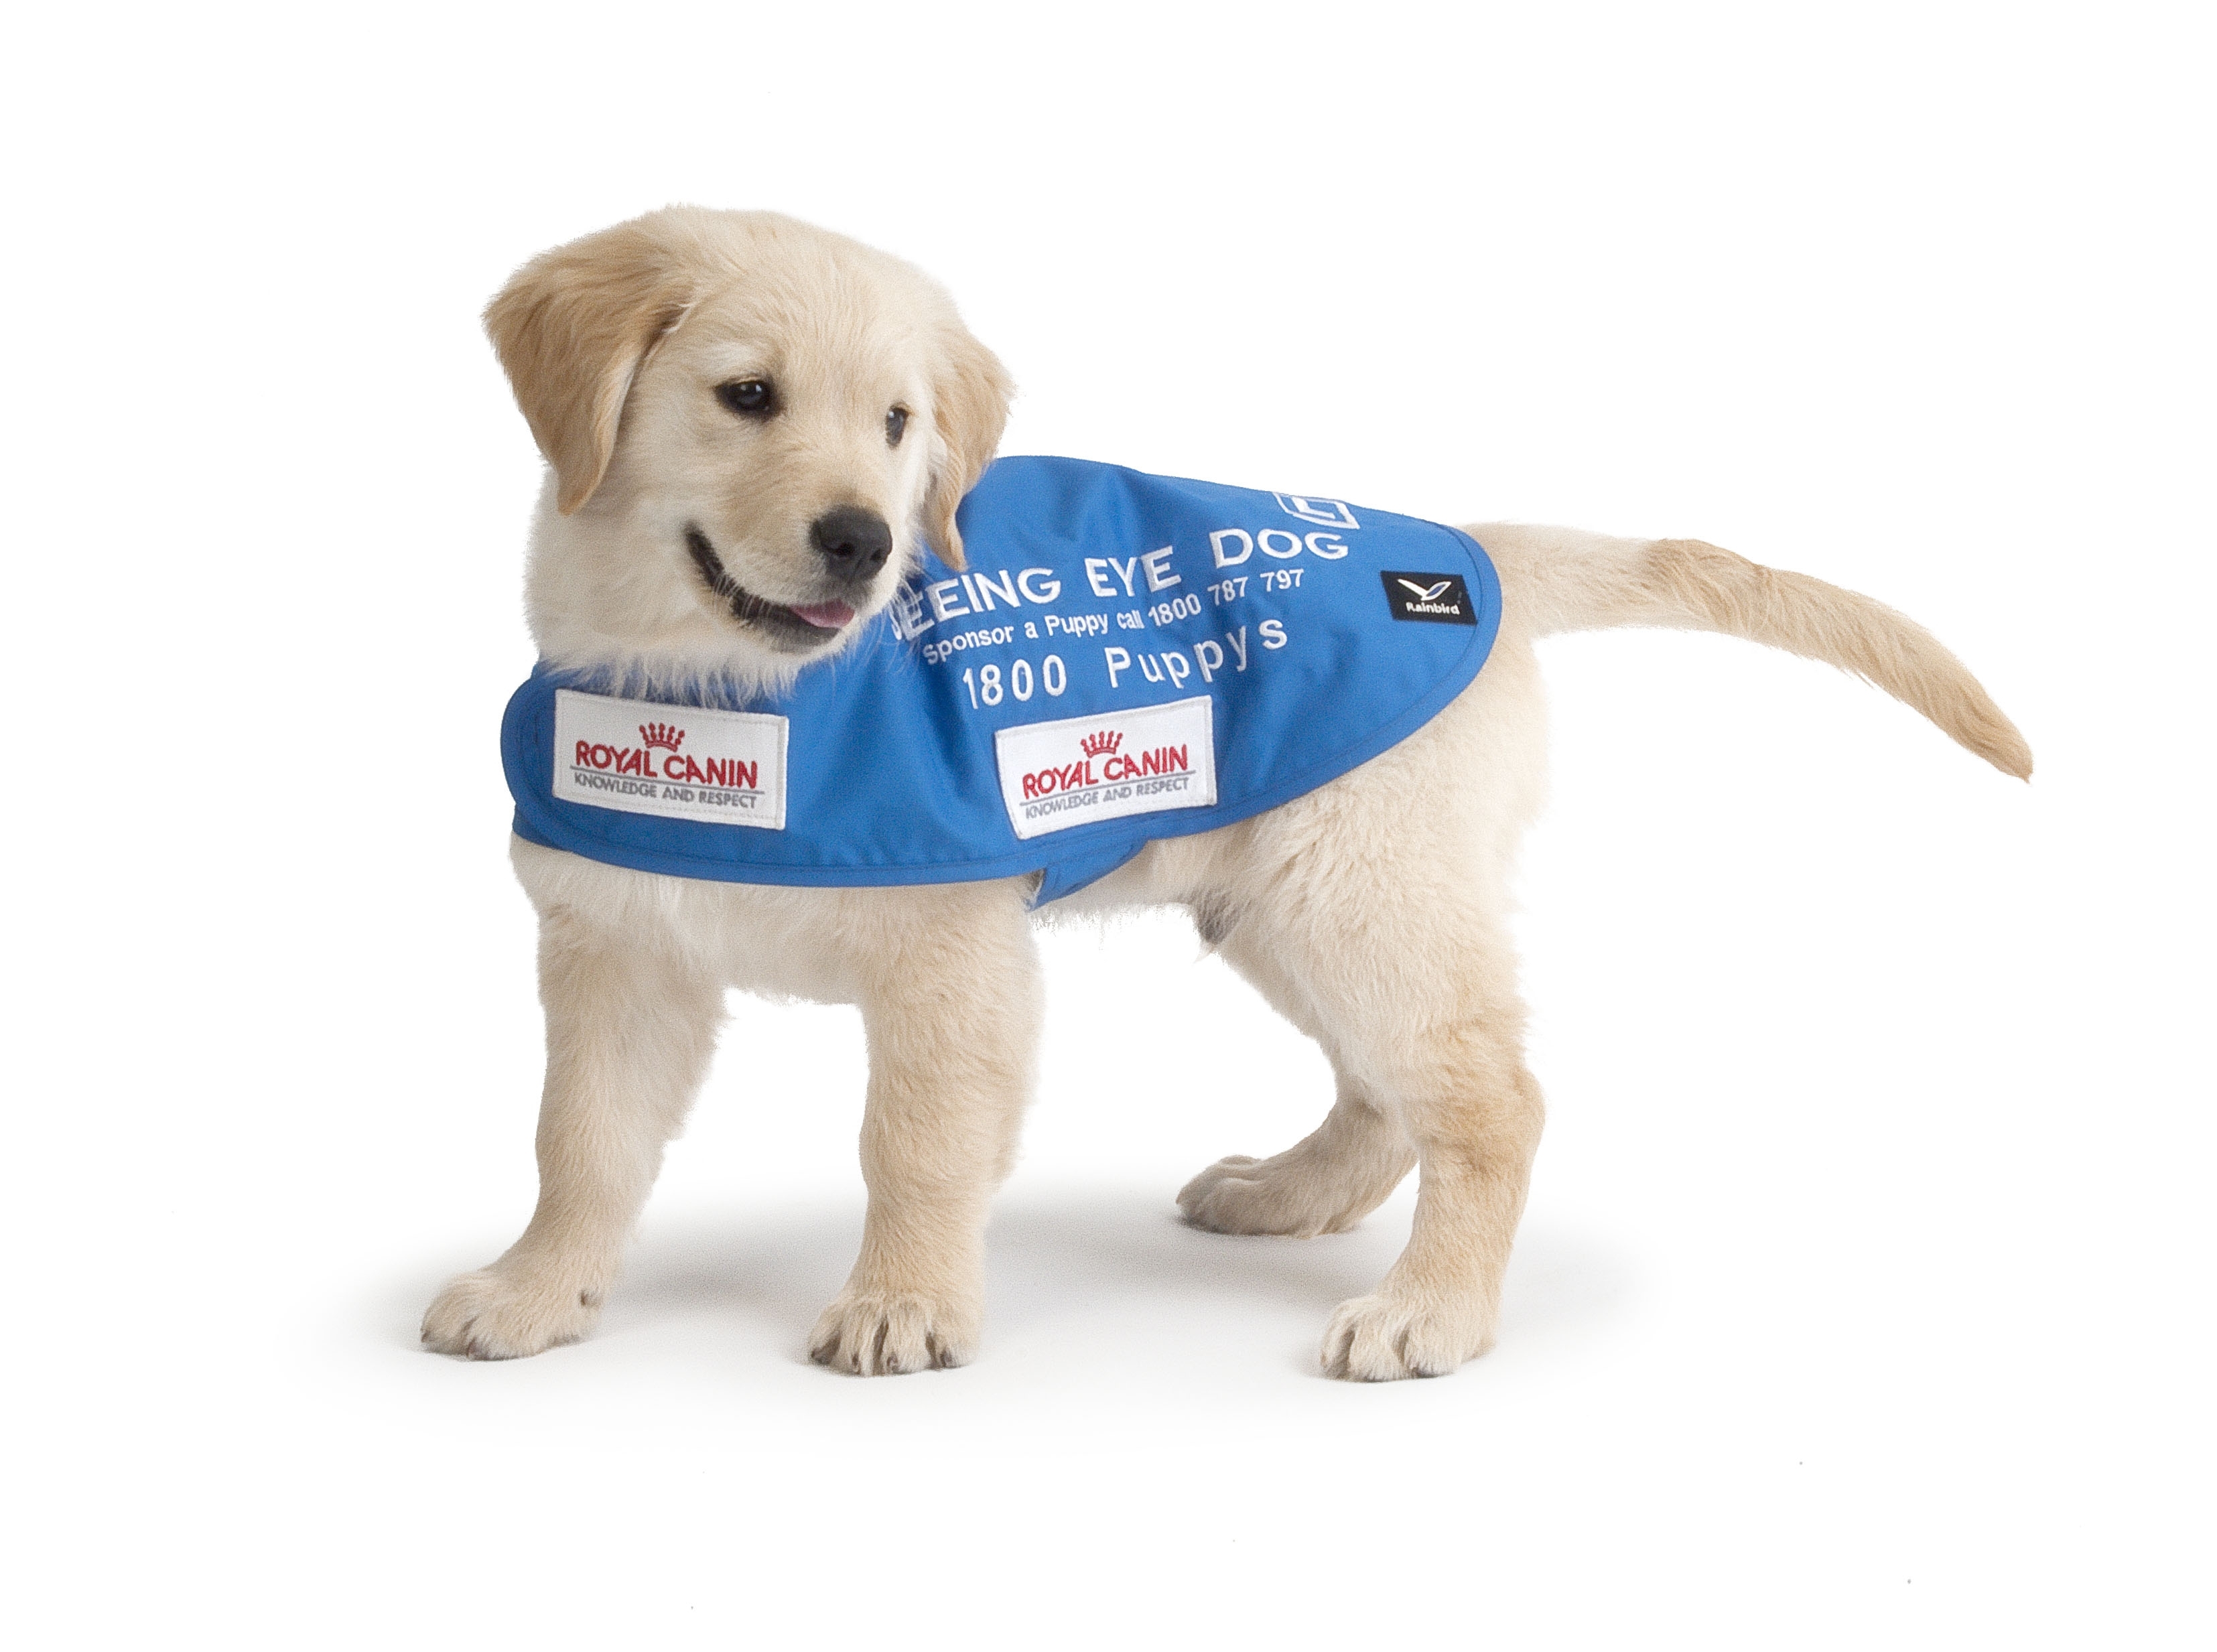 How to become a puppy carer | Seeing Eye Dogs Australia